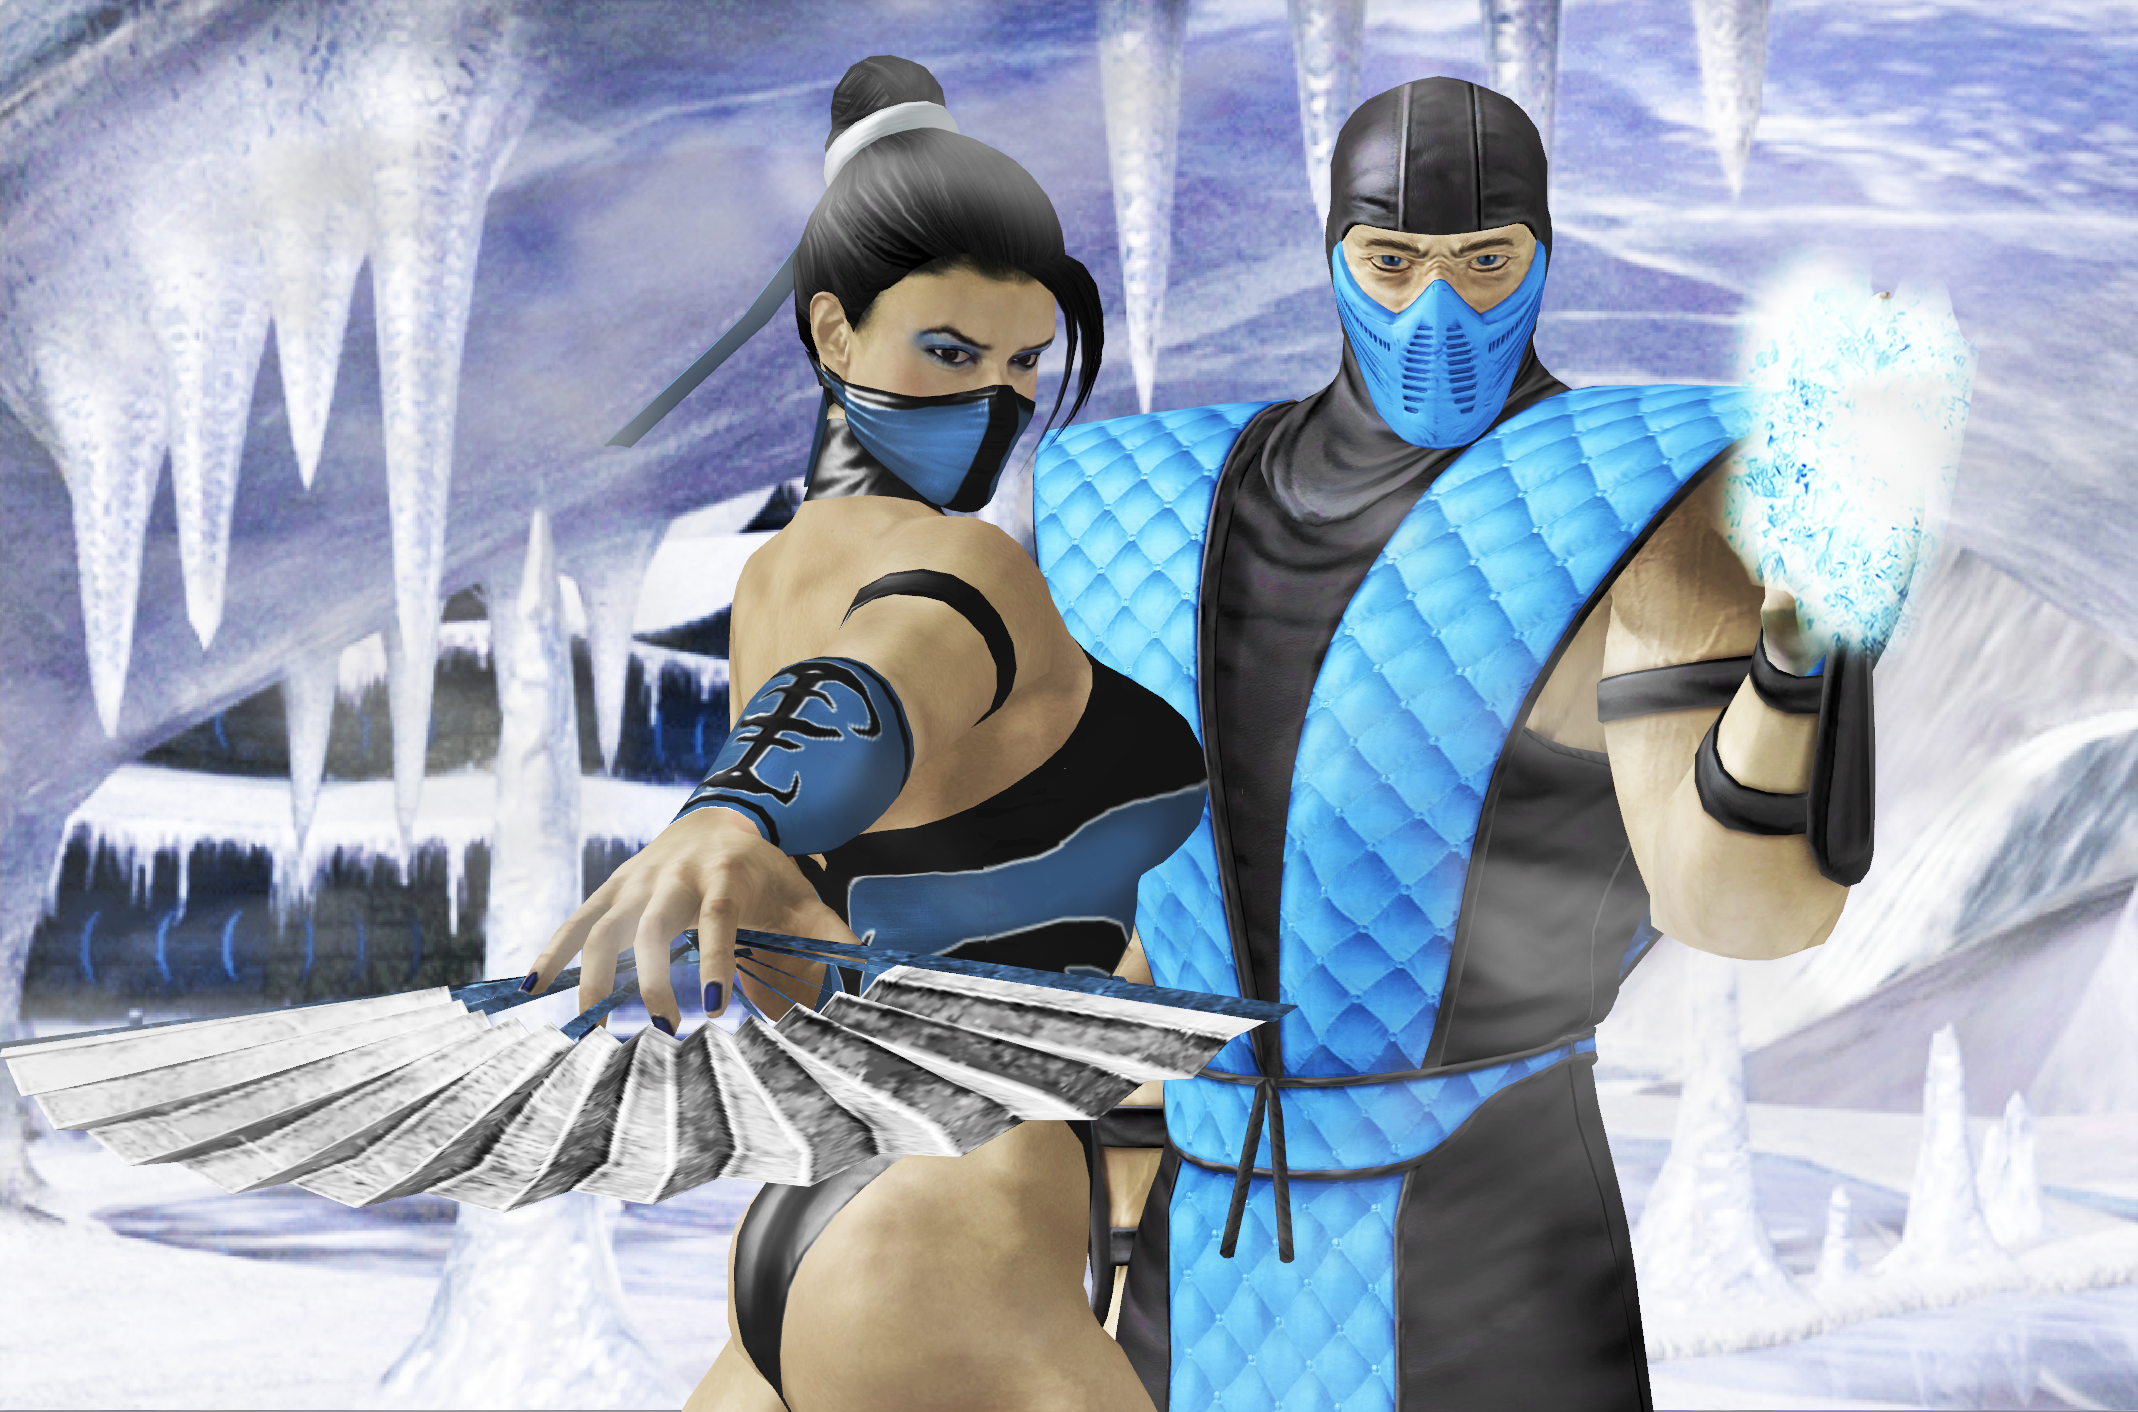 Sub-zero x Kitana: wee can see you... by Weskervit789 on DeviantArt